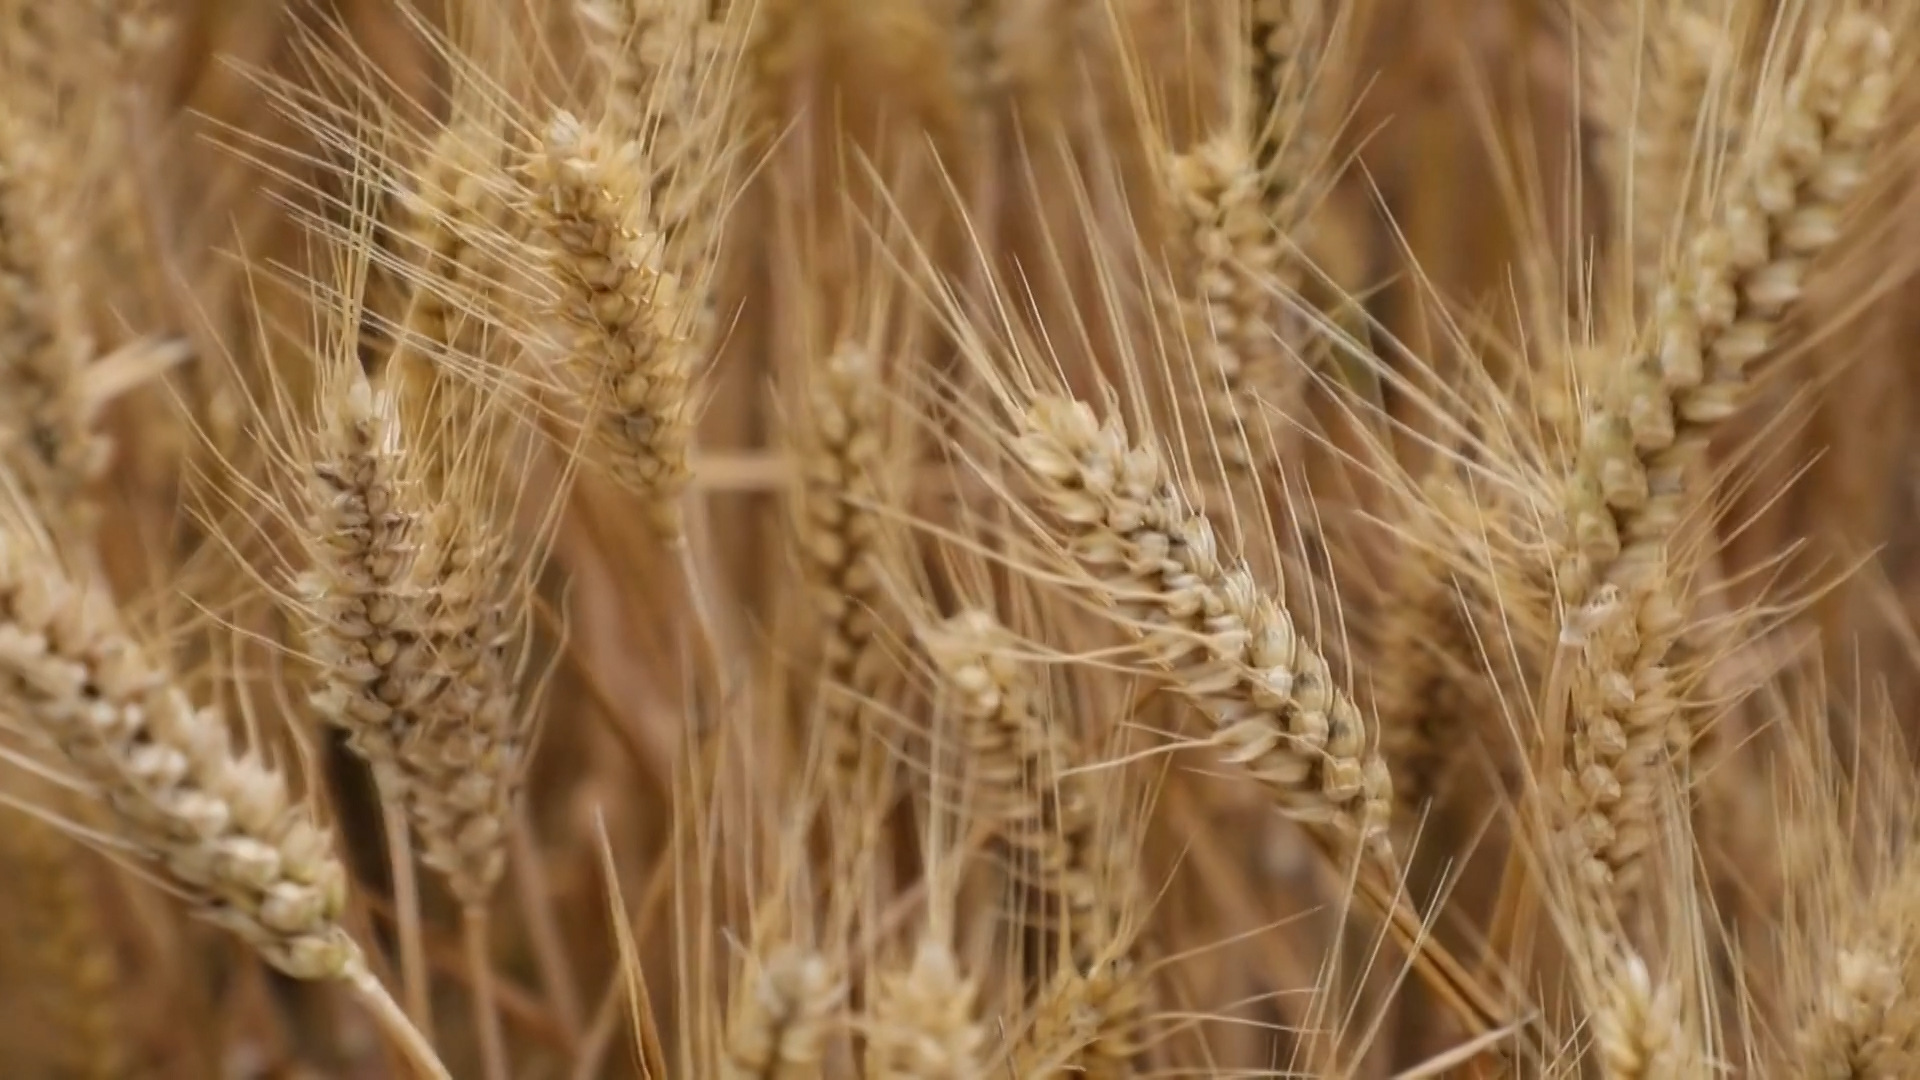 Farmers in China rush to harvest wheat after heavy rains damage crops